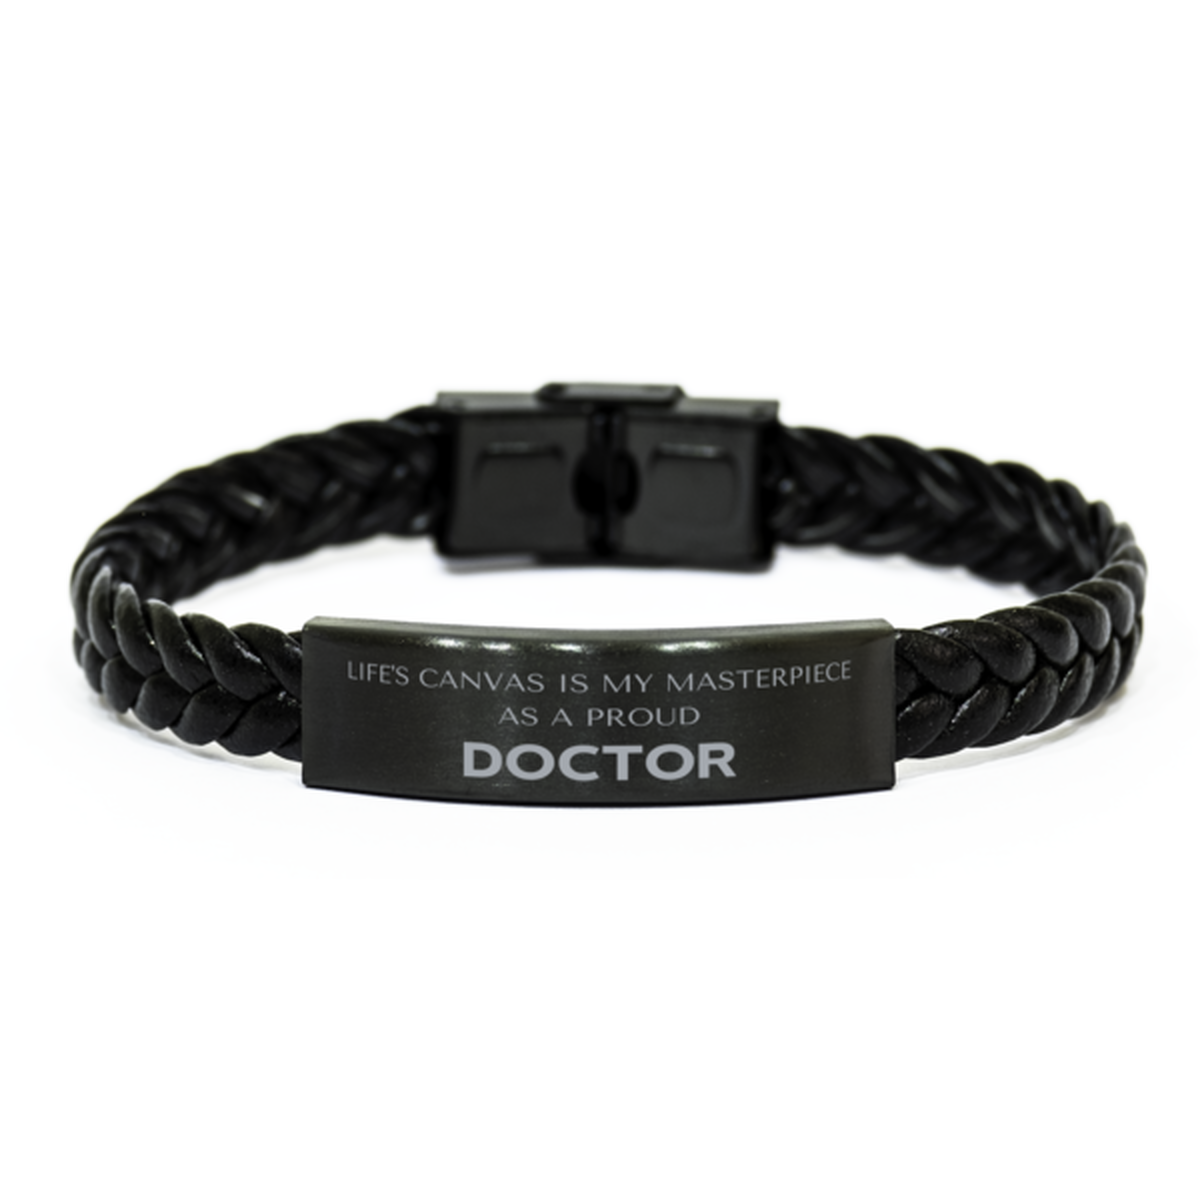 Proud Doctor Gifts, Life's canvas is my masterpiece, Epic Birthday Christmas Unique Braided Leather Bracelet For Doctor, Coworkers, Men, Women, Friends